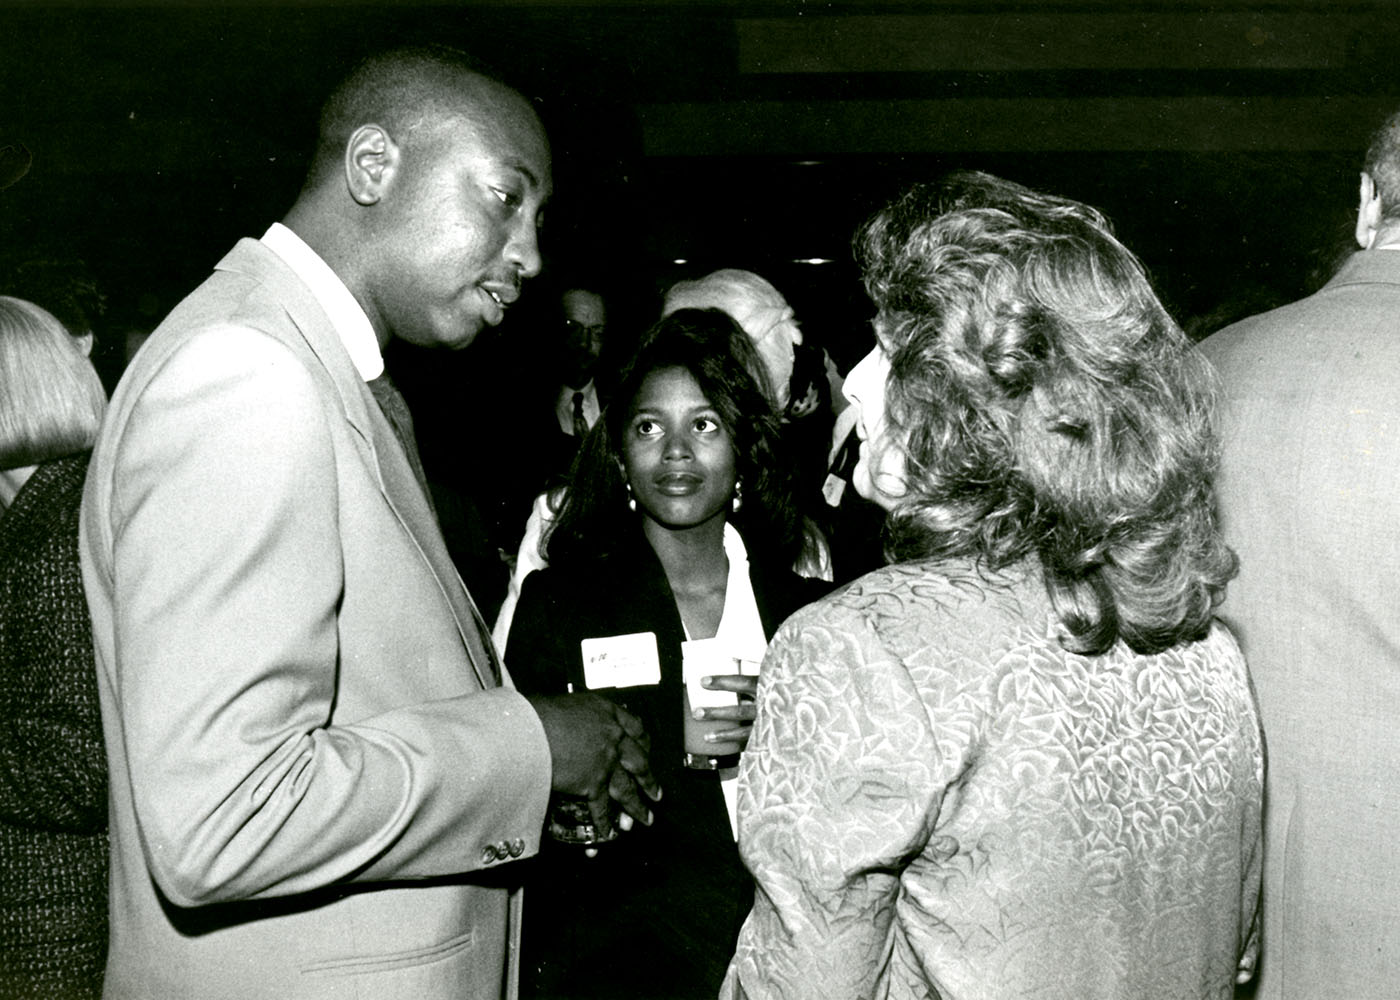 People conversing at the law school 20th Anniversary in 1992